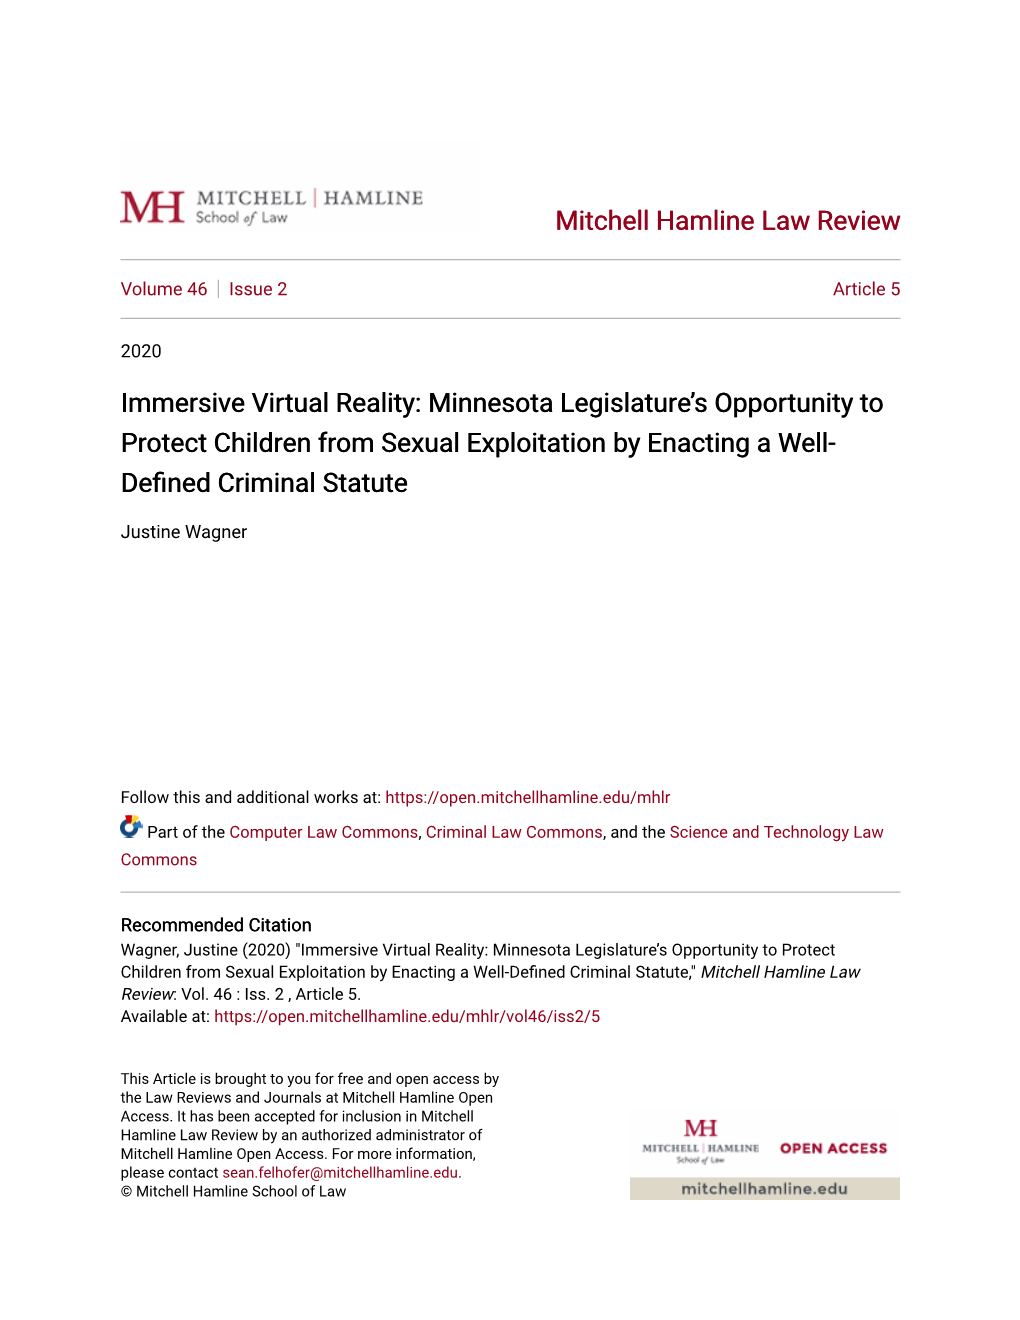 Immersive Virtual Reality: Minnesota Legislature’S Opportunity to Protect Children from Sexual Exploitation by Enacting a Well- Defined Criminal Statute